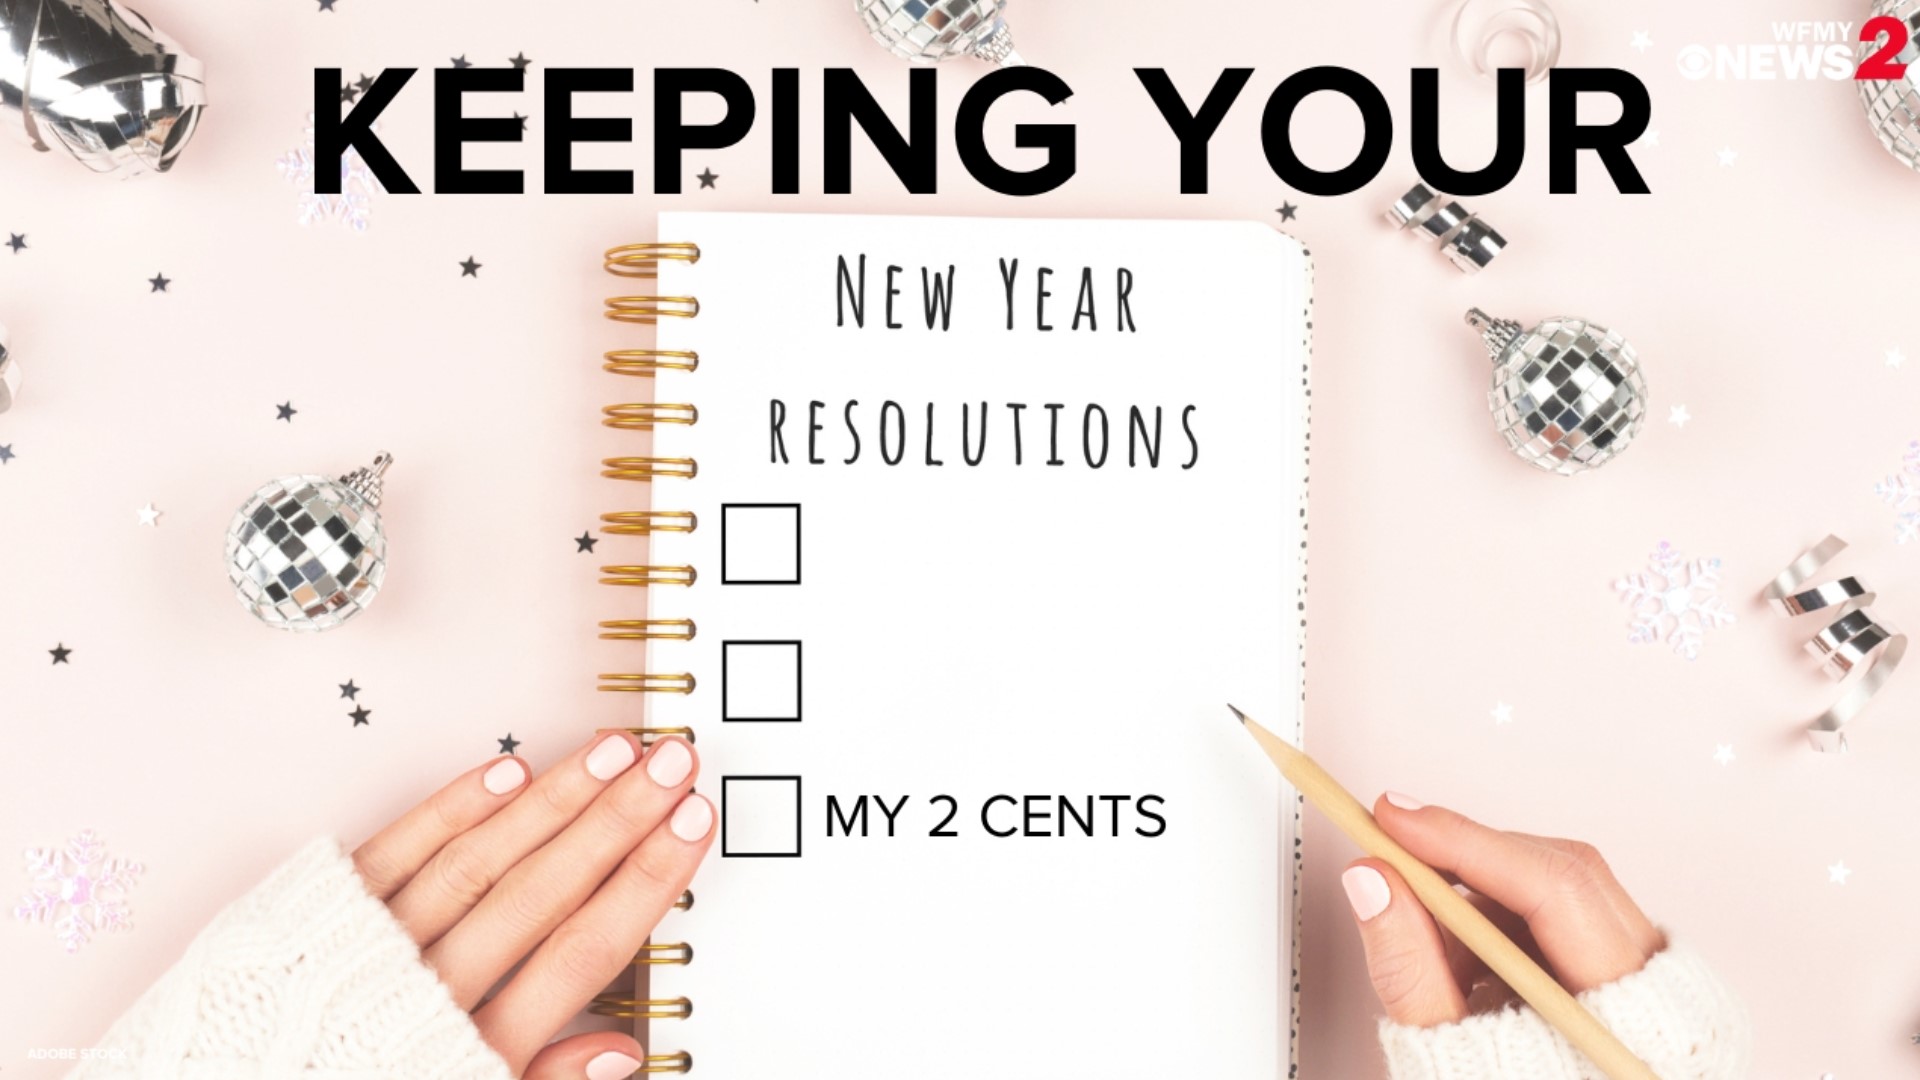 We’re nearly a month into the new year. How are your new year’s resolutions holding up?